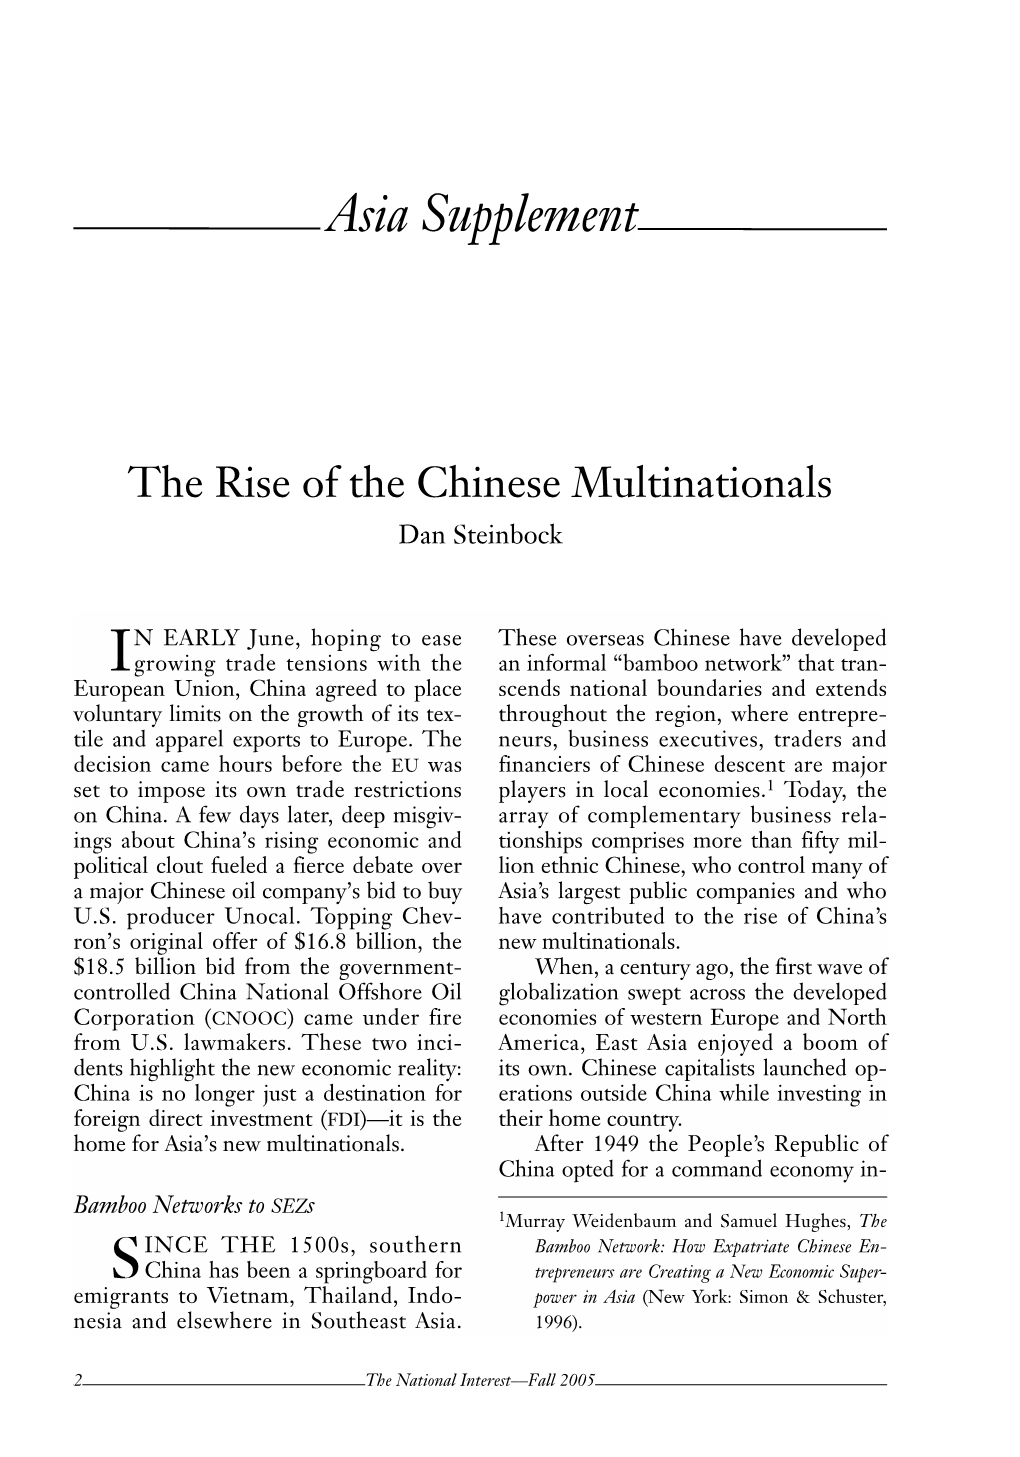 The Rise of the Chinese Multinationals Dan Steinbock